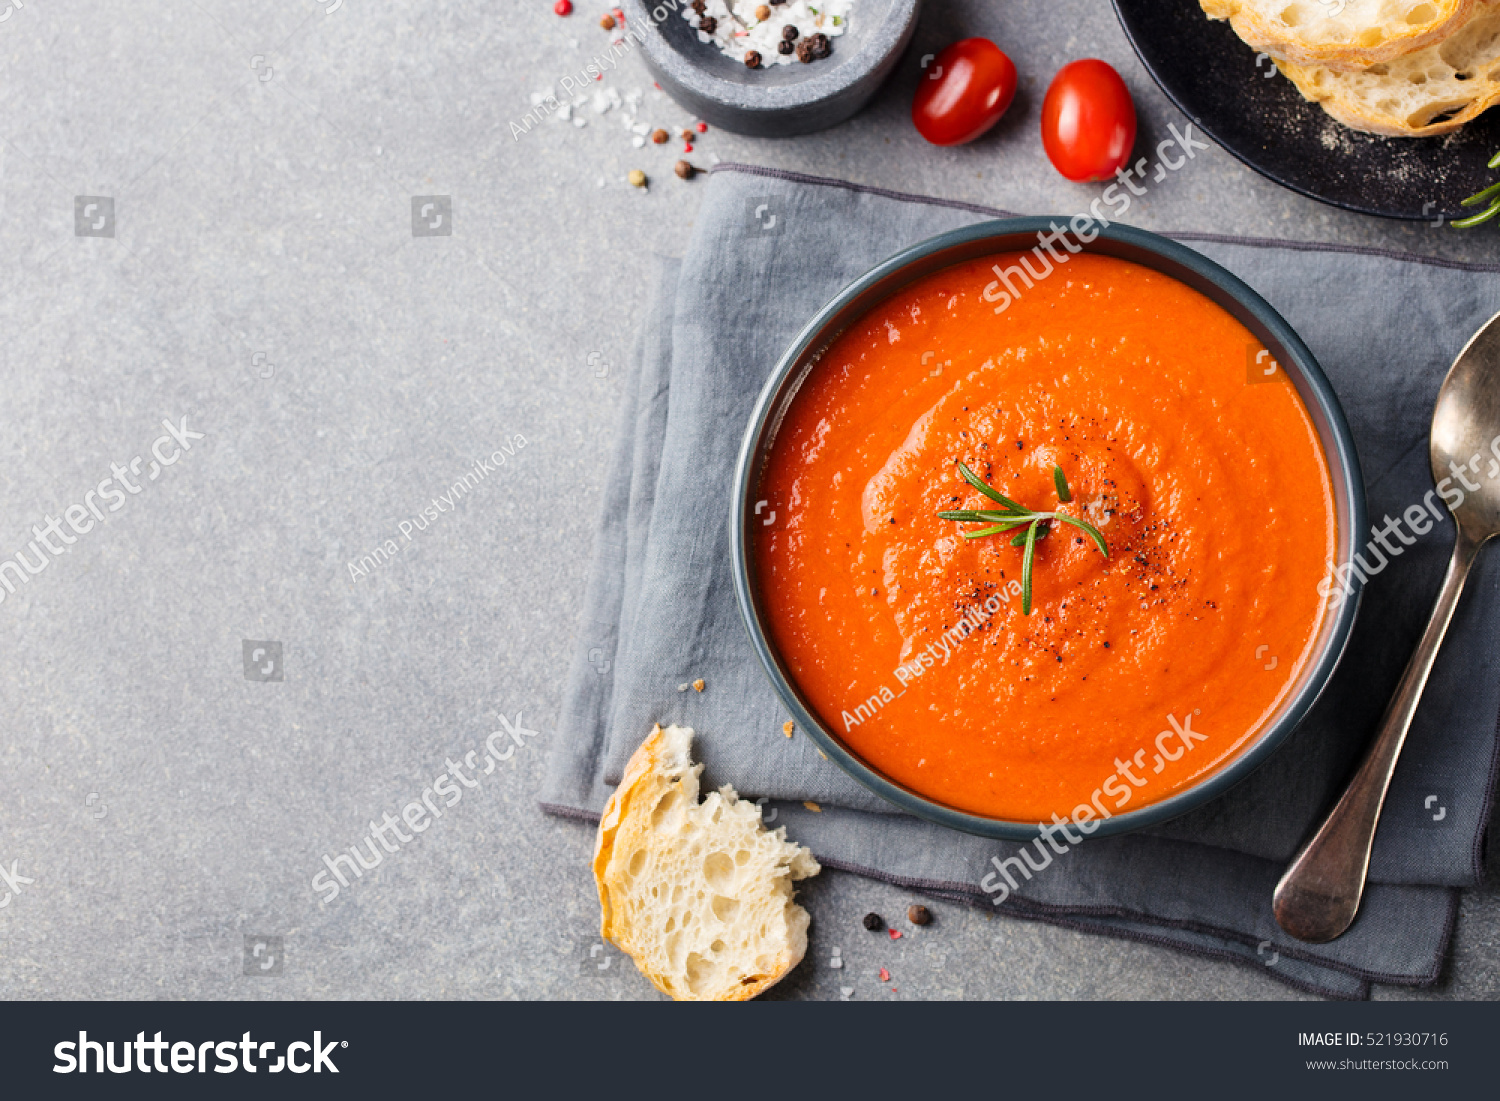 Tomato soup in a black bowl on grey stone background. Top view. Copy space. #521930716